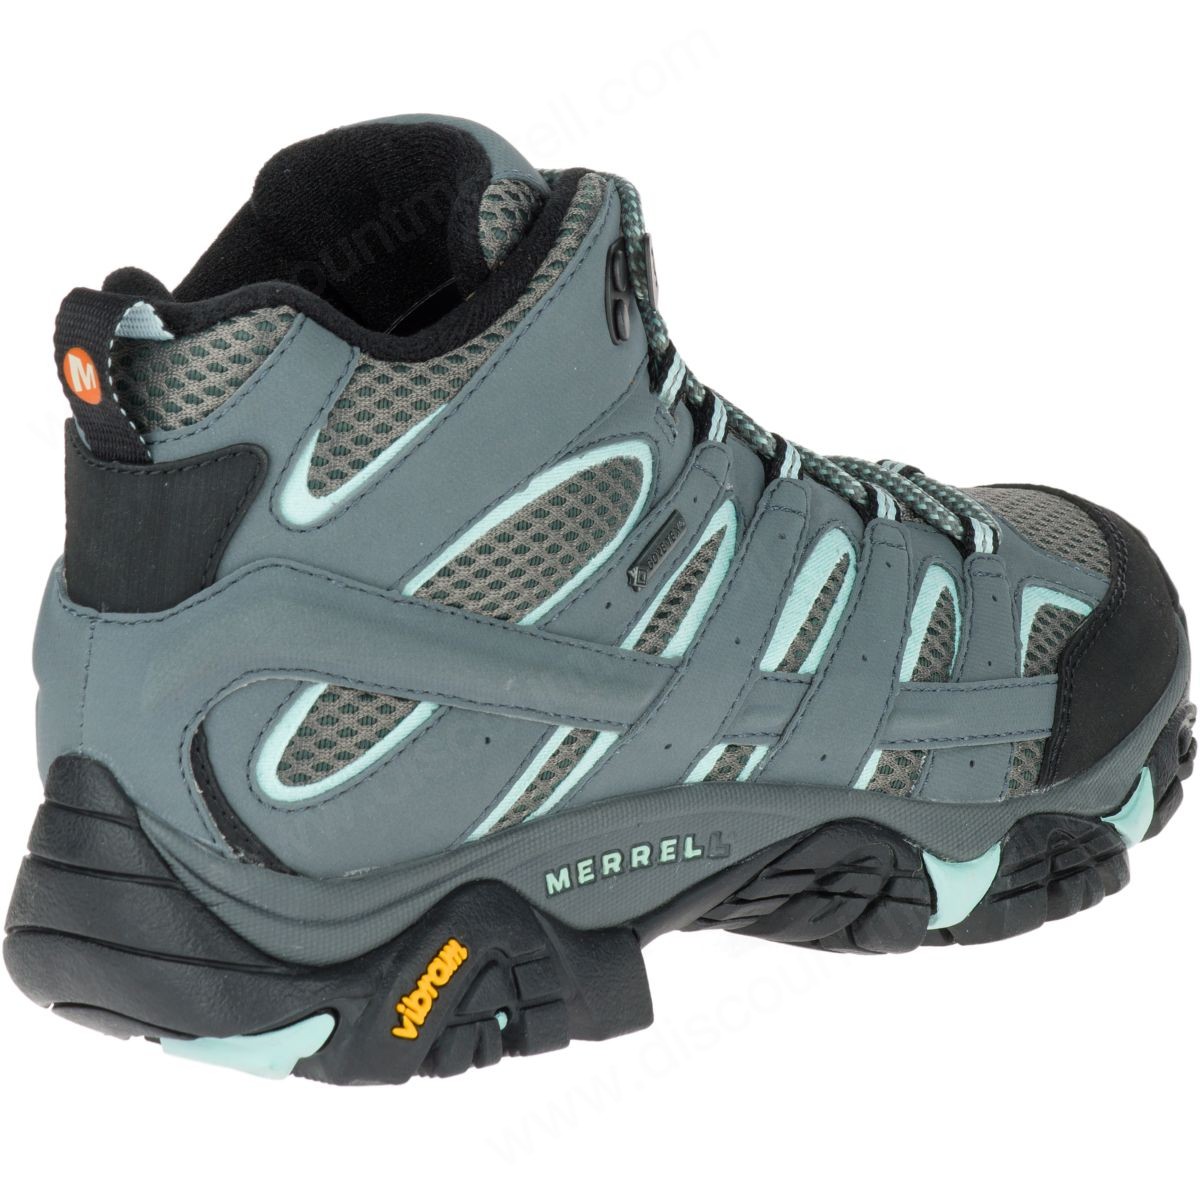 Merrell Women's Moab Mother Of All Boots™ Mid Gore-Tex® Sedona Sage - -7